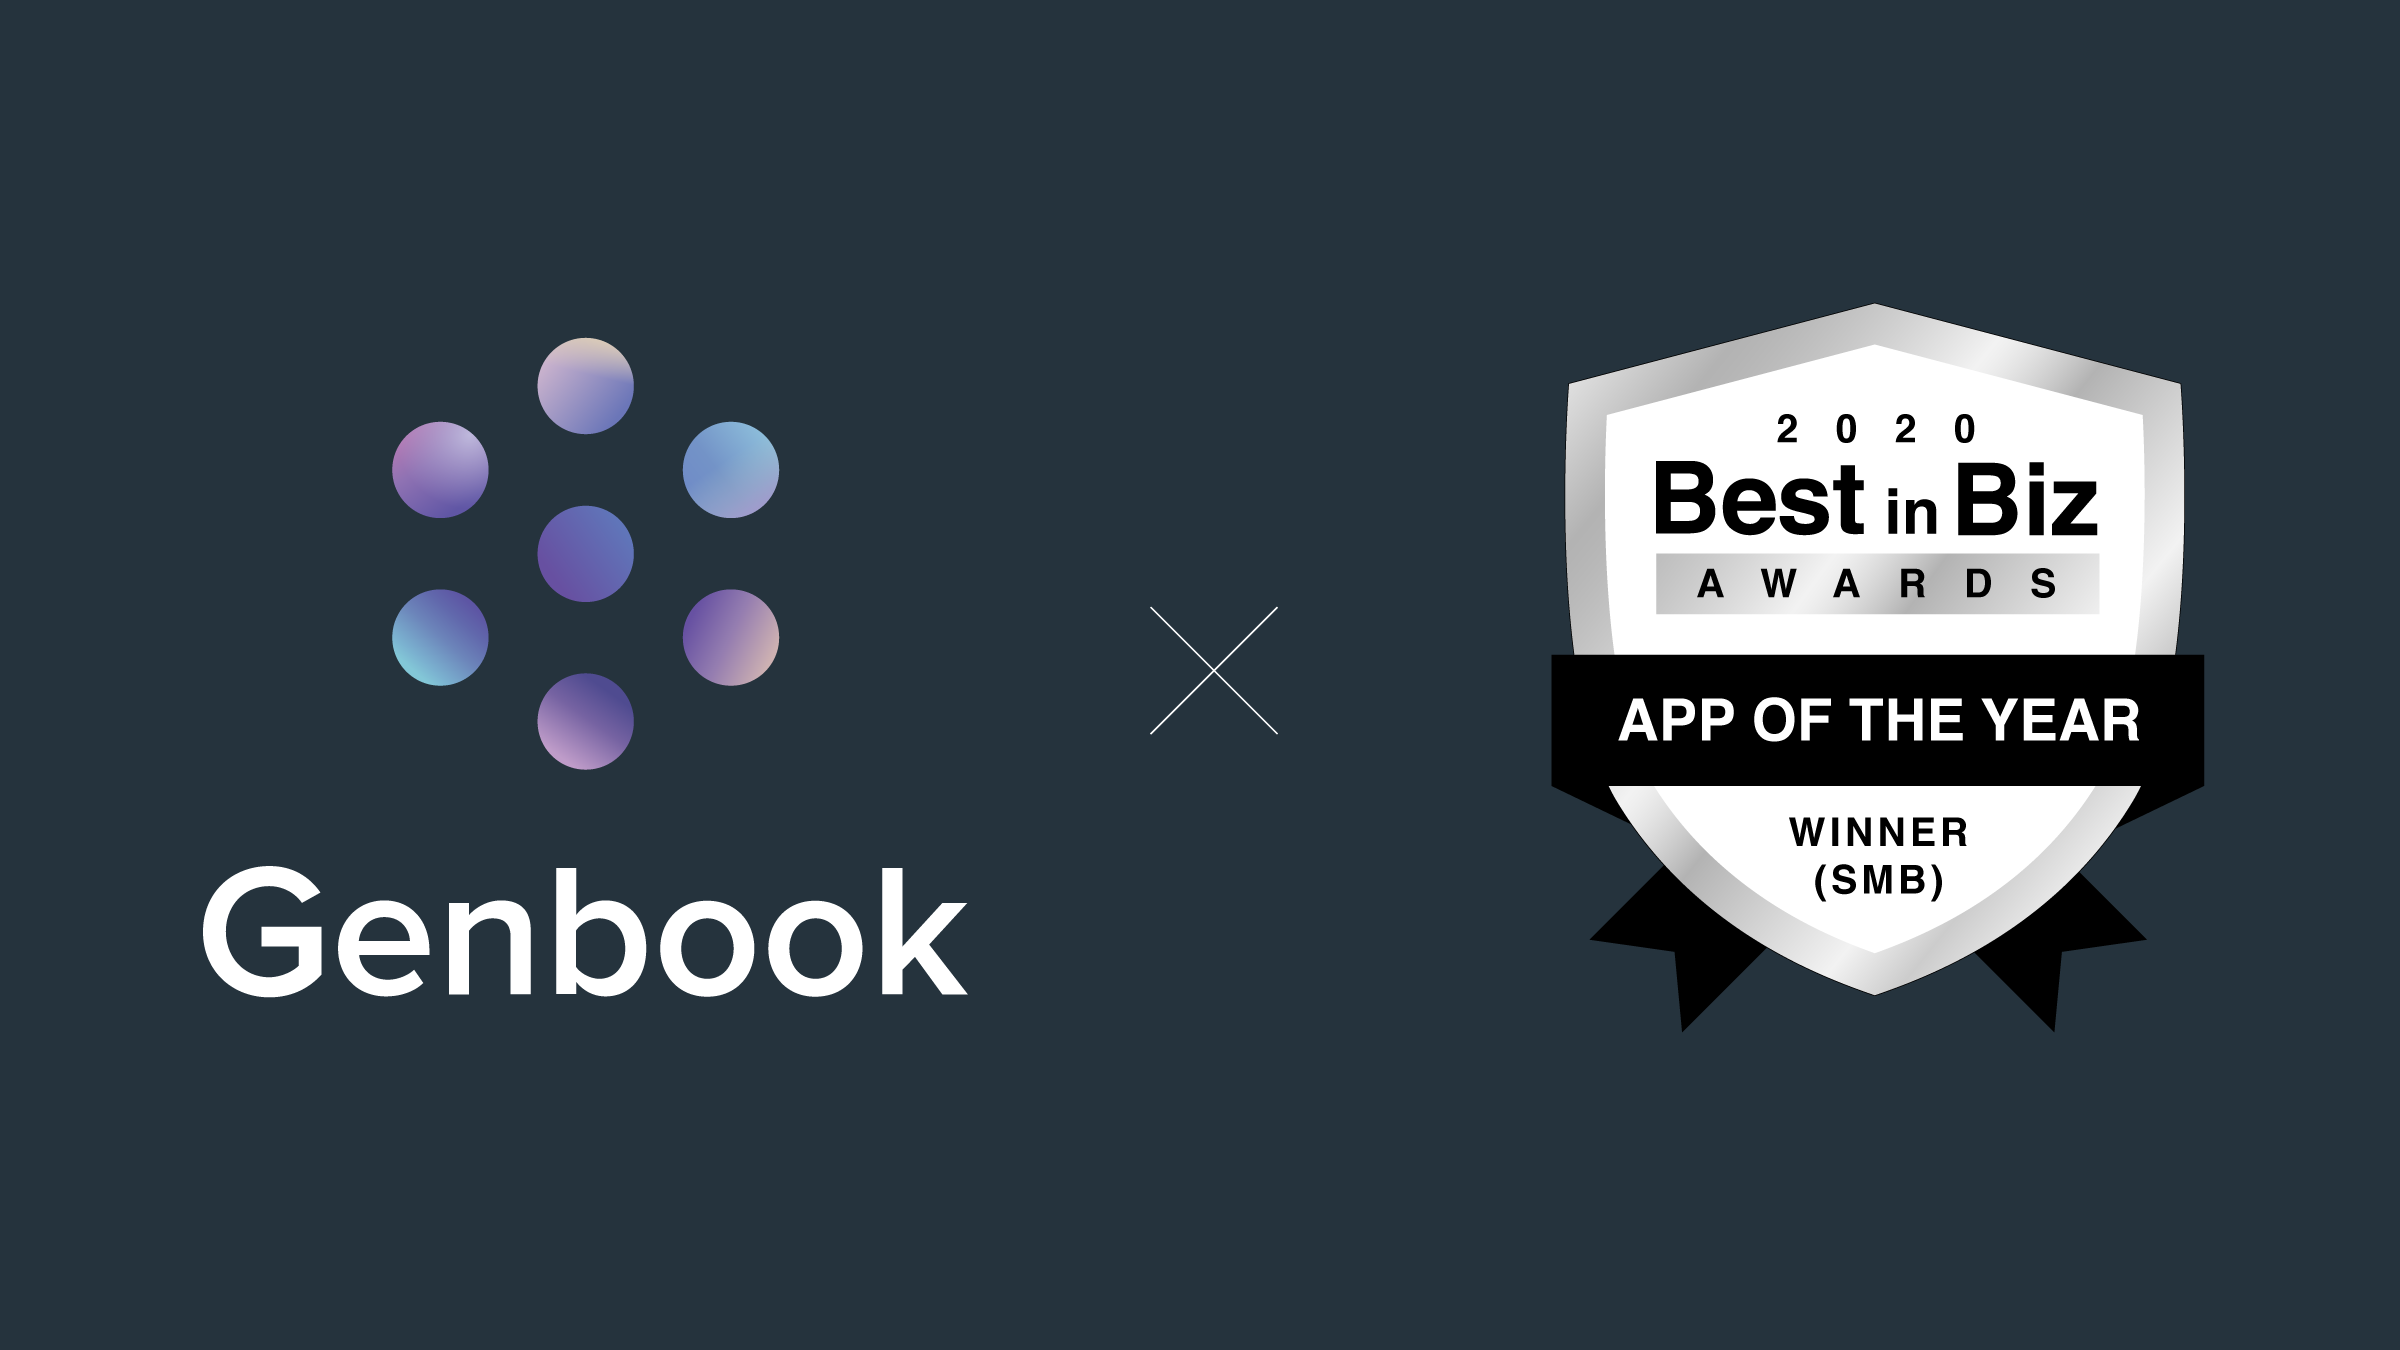 Genbook wins App of the Year (SMB) in the 10th annual Best in Biz Awards